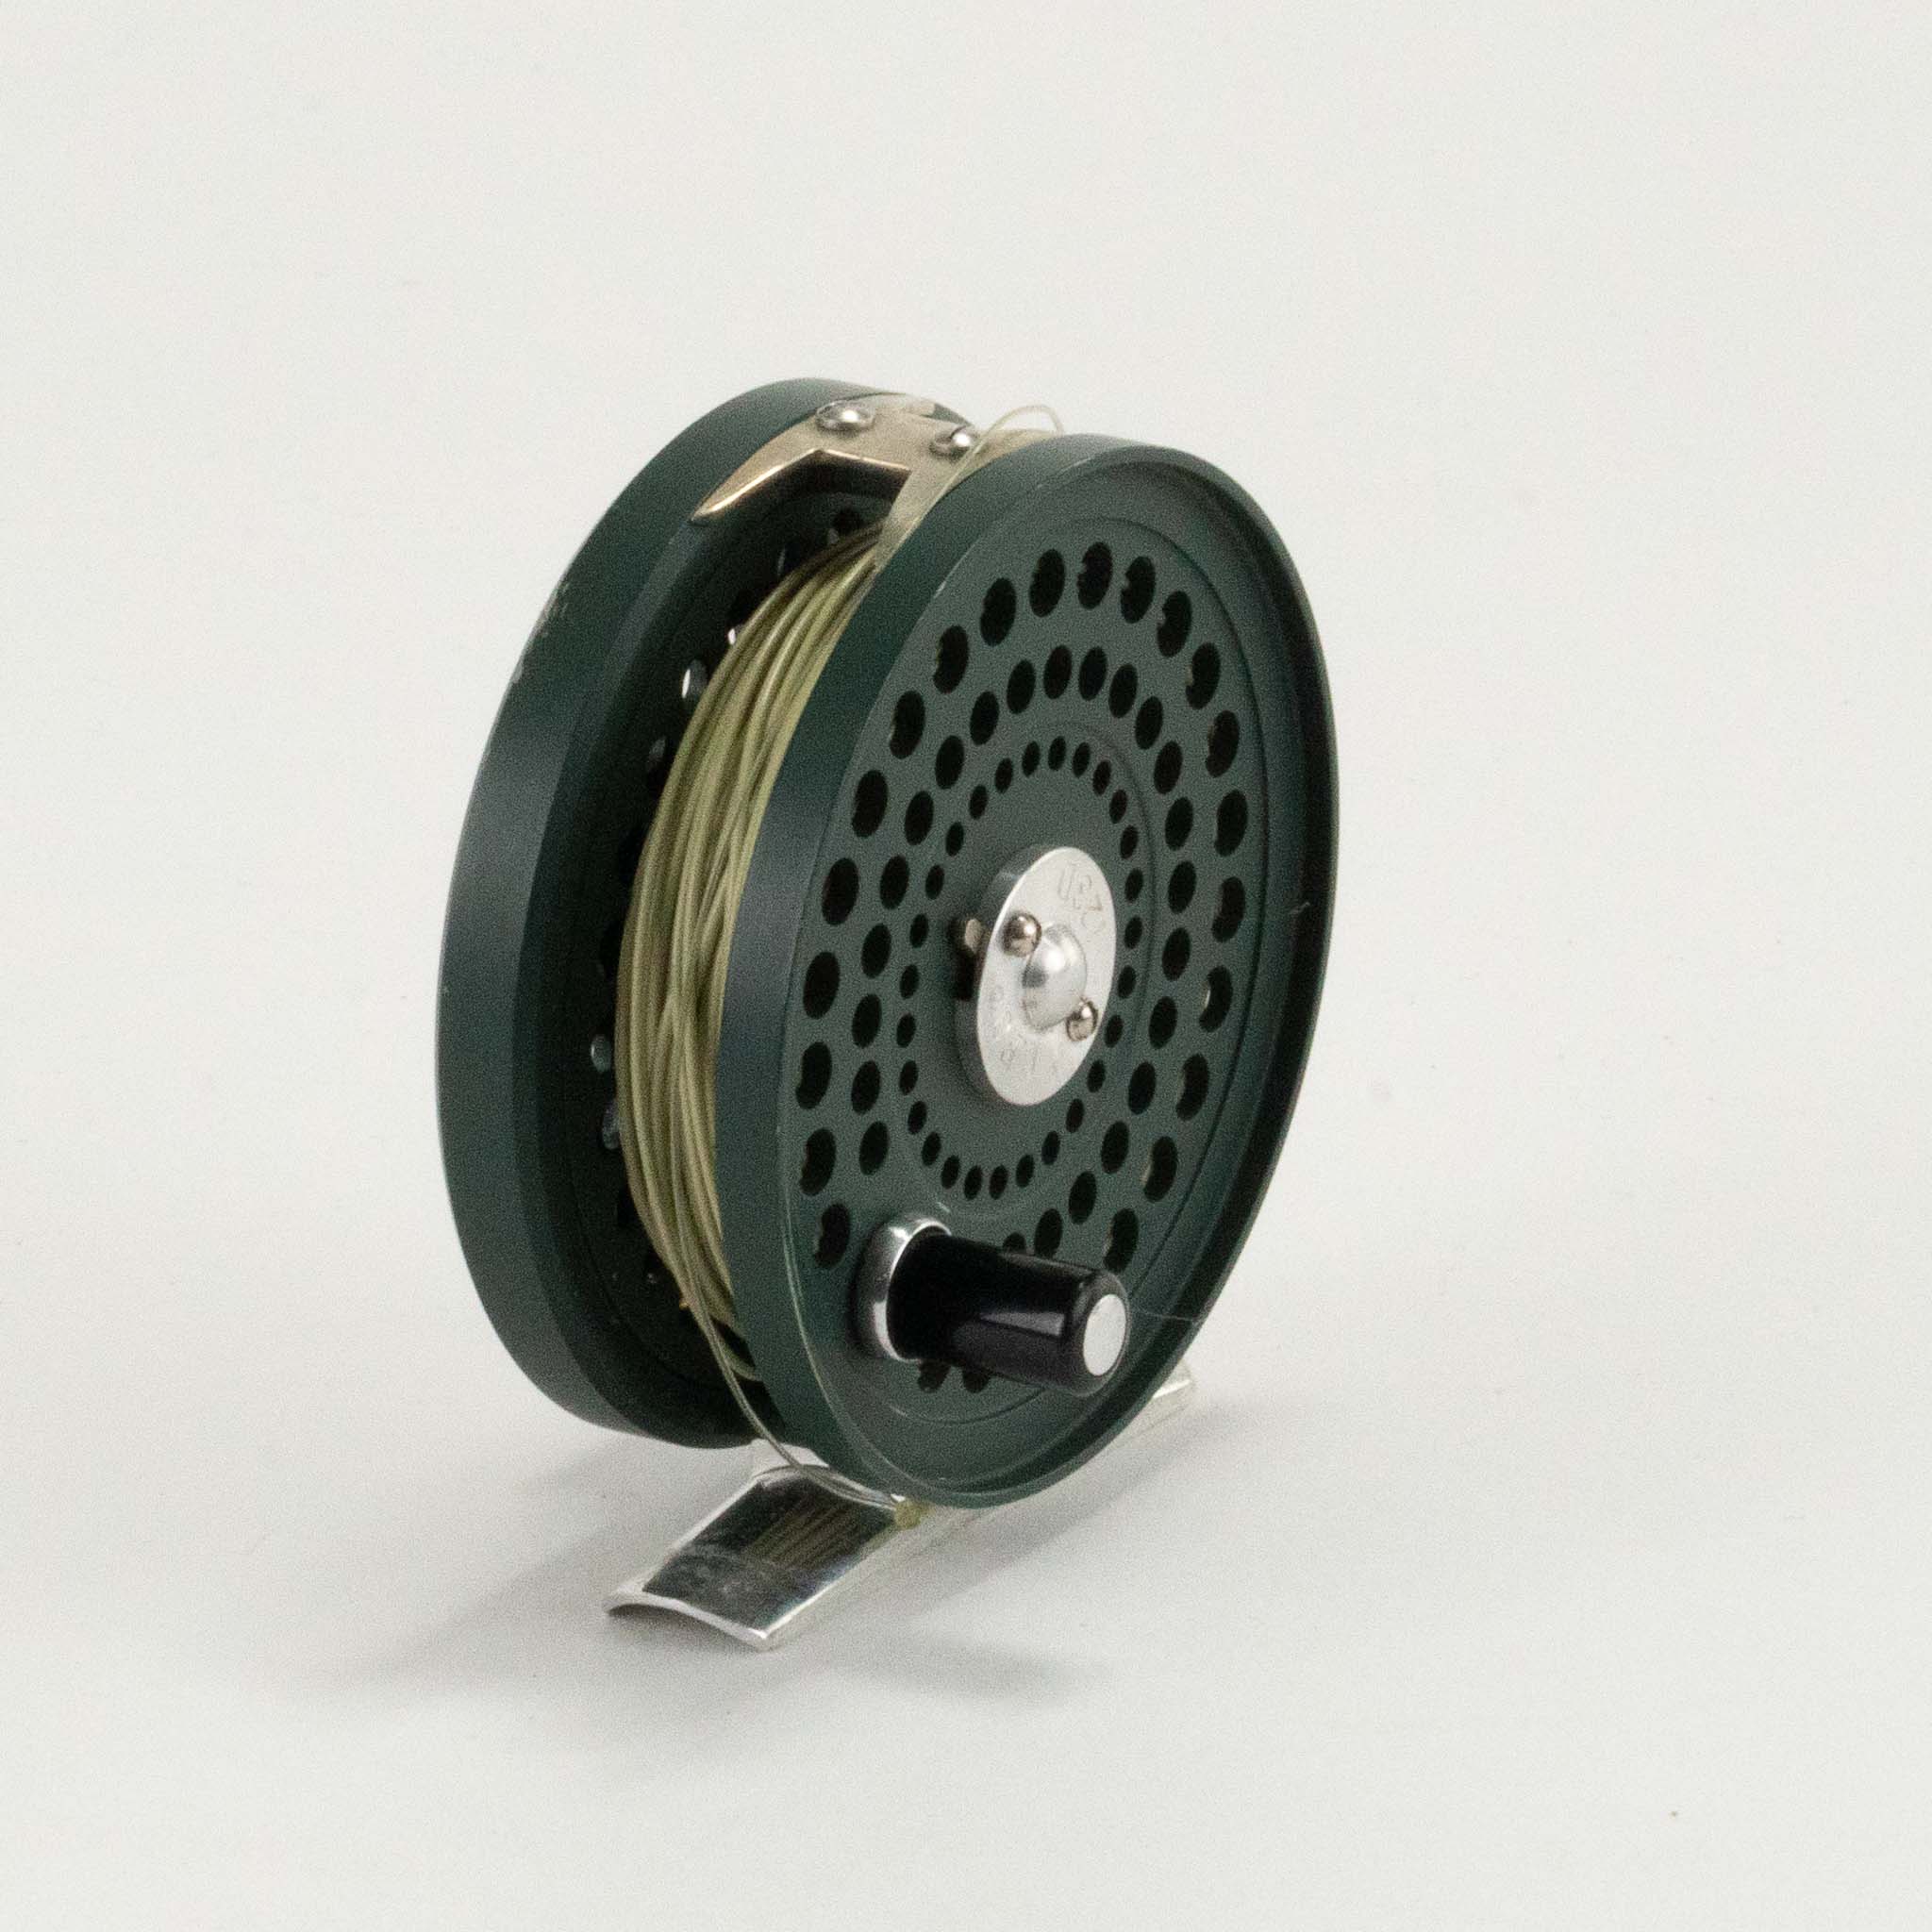 Orvis CFO 123 Fly Fishing Reel. Green & Gold. Made in England. W